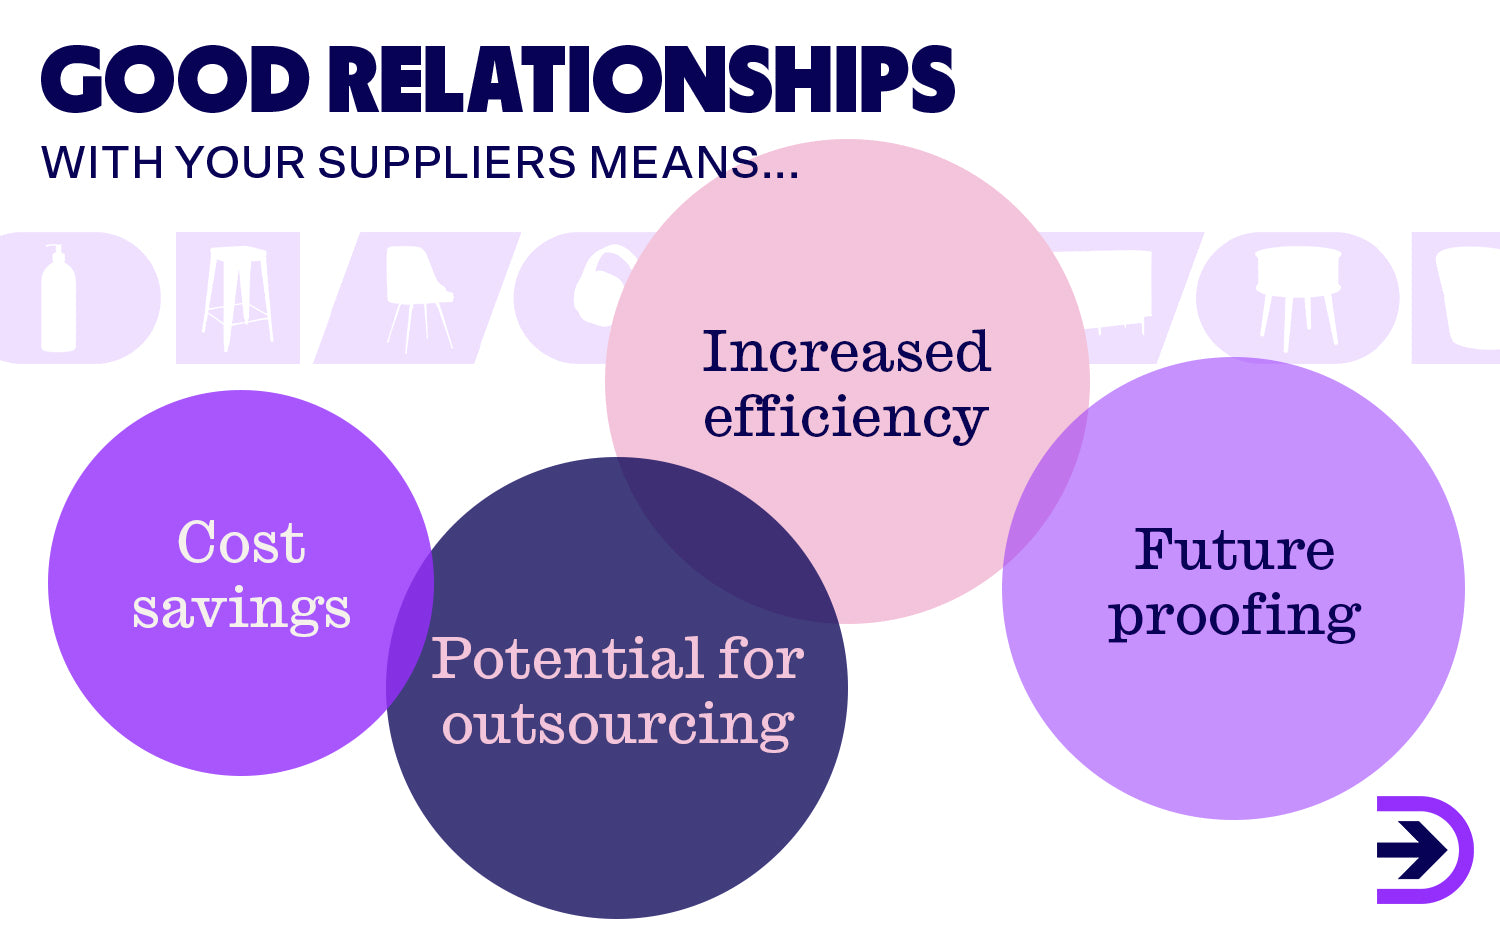 Maintaining a good relationship with suppliers can be rewarding with increased efficiency and cost savings, amongst other benefits.